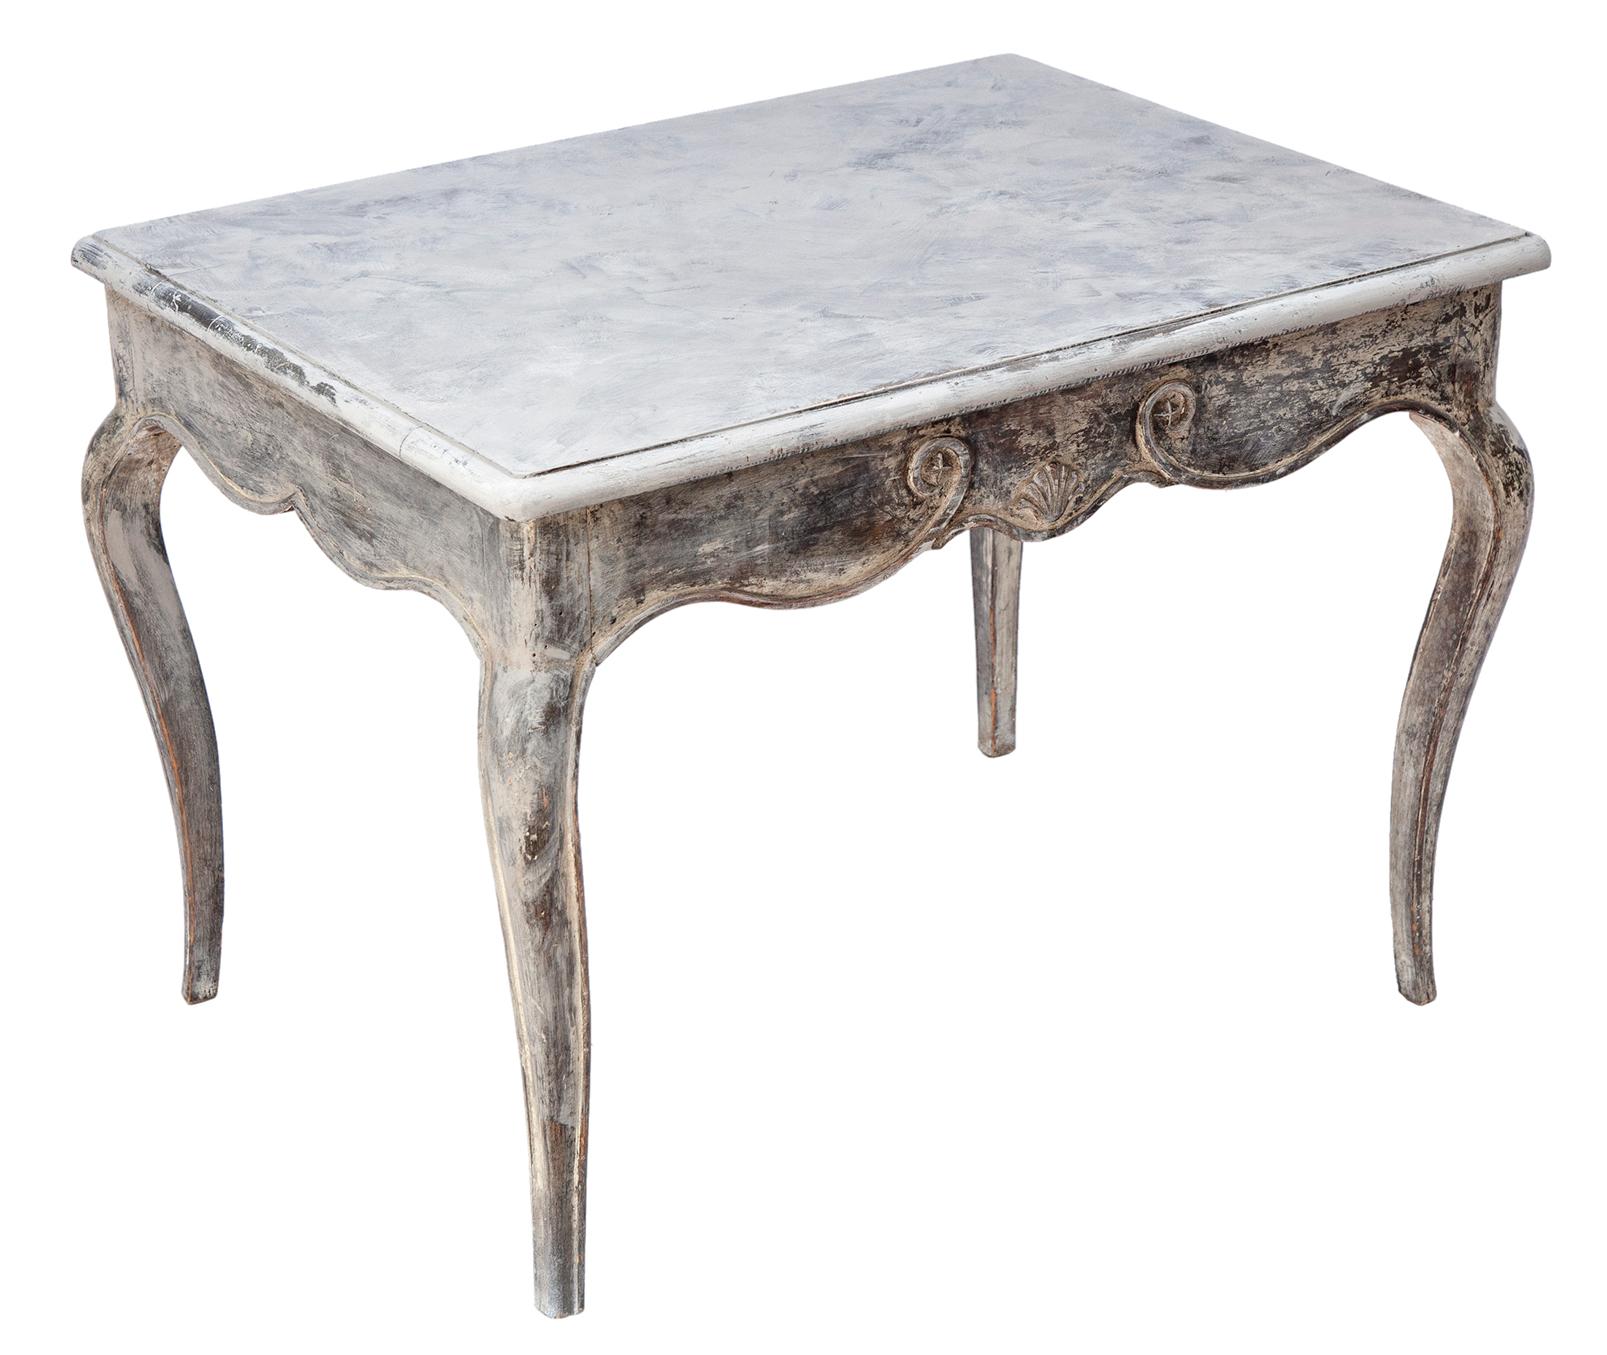 20th Century Rustic French Provincial Style Side Table For Sale